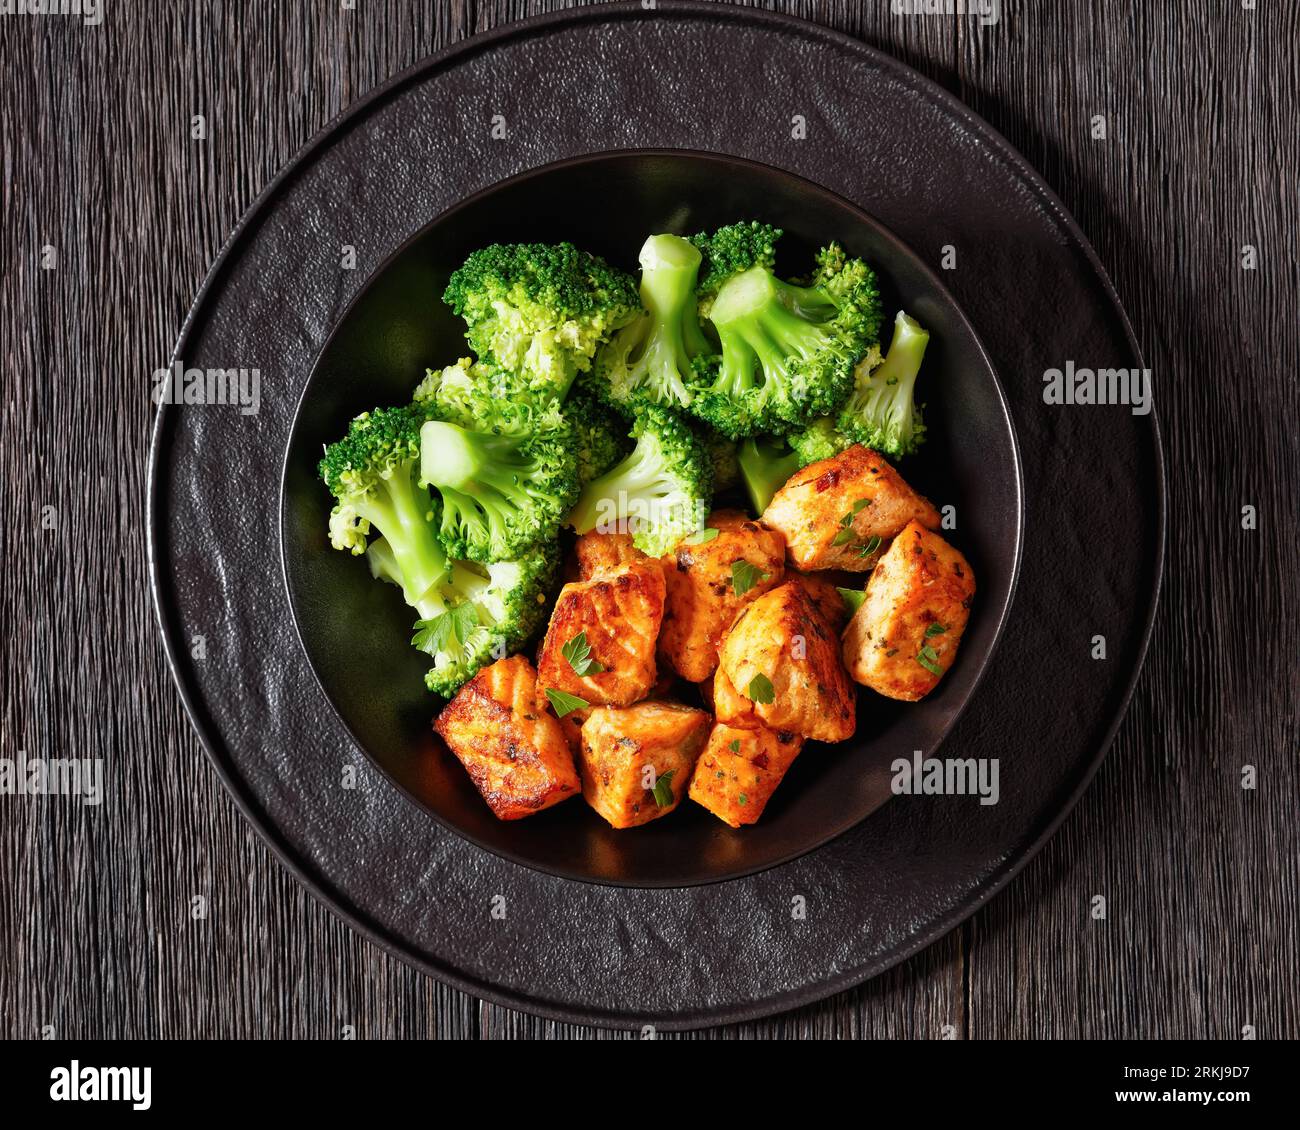 baked salmon bites with steamed broccoli florets in black bowl on dark wooden table with sriracha mayo sauce, horizontal view from above, close-up Stock Photo